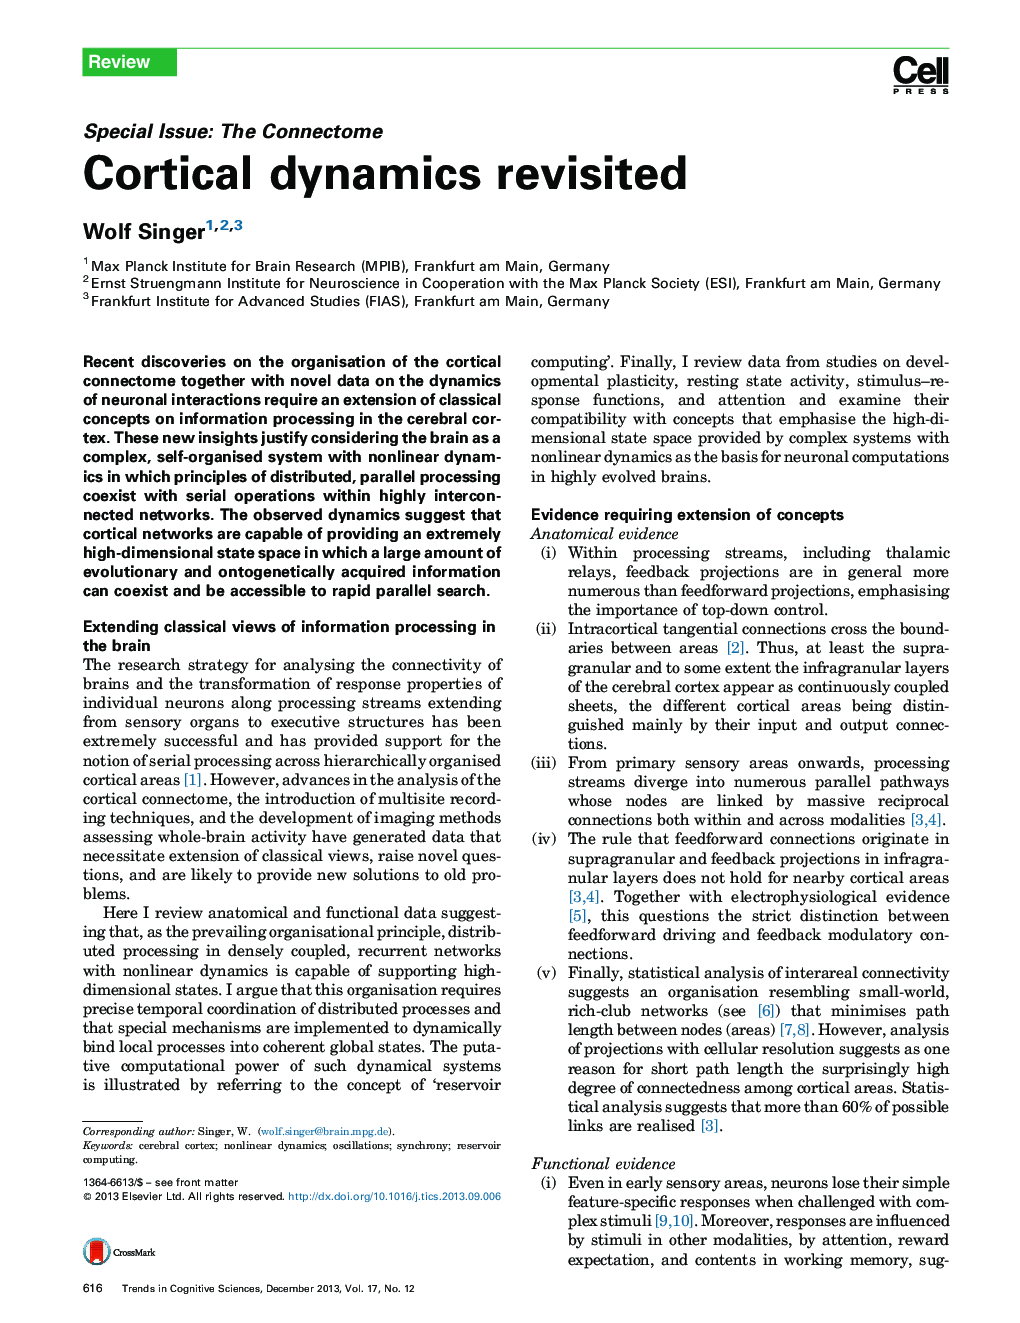 Cortical dynamics revisited